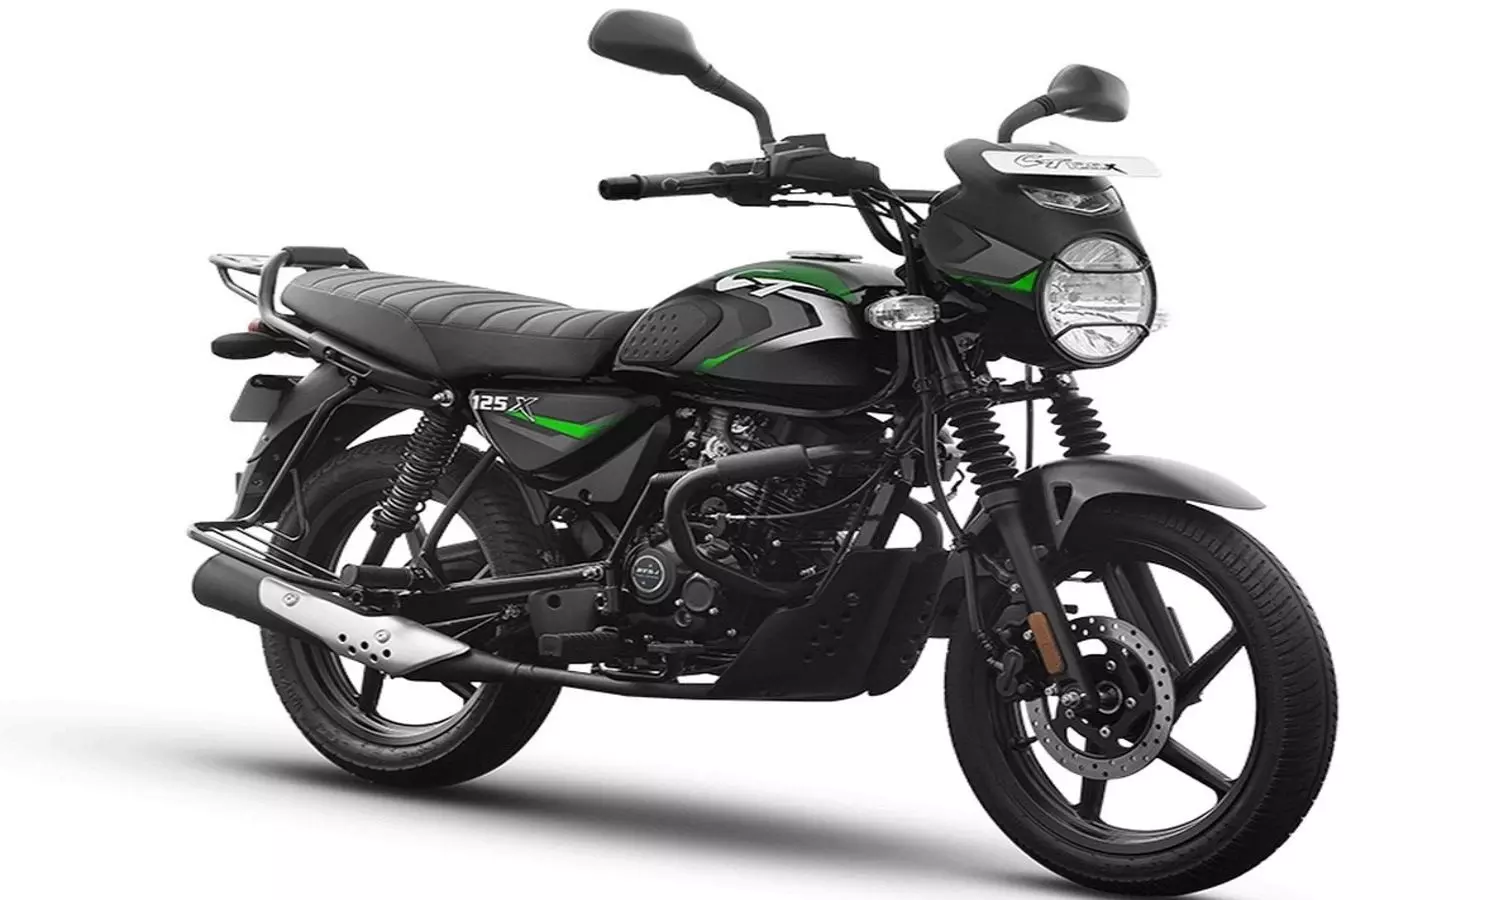 The Worlds First CNG Bike Will Be Launched Bajaj Auto On June 18